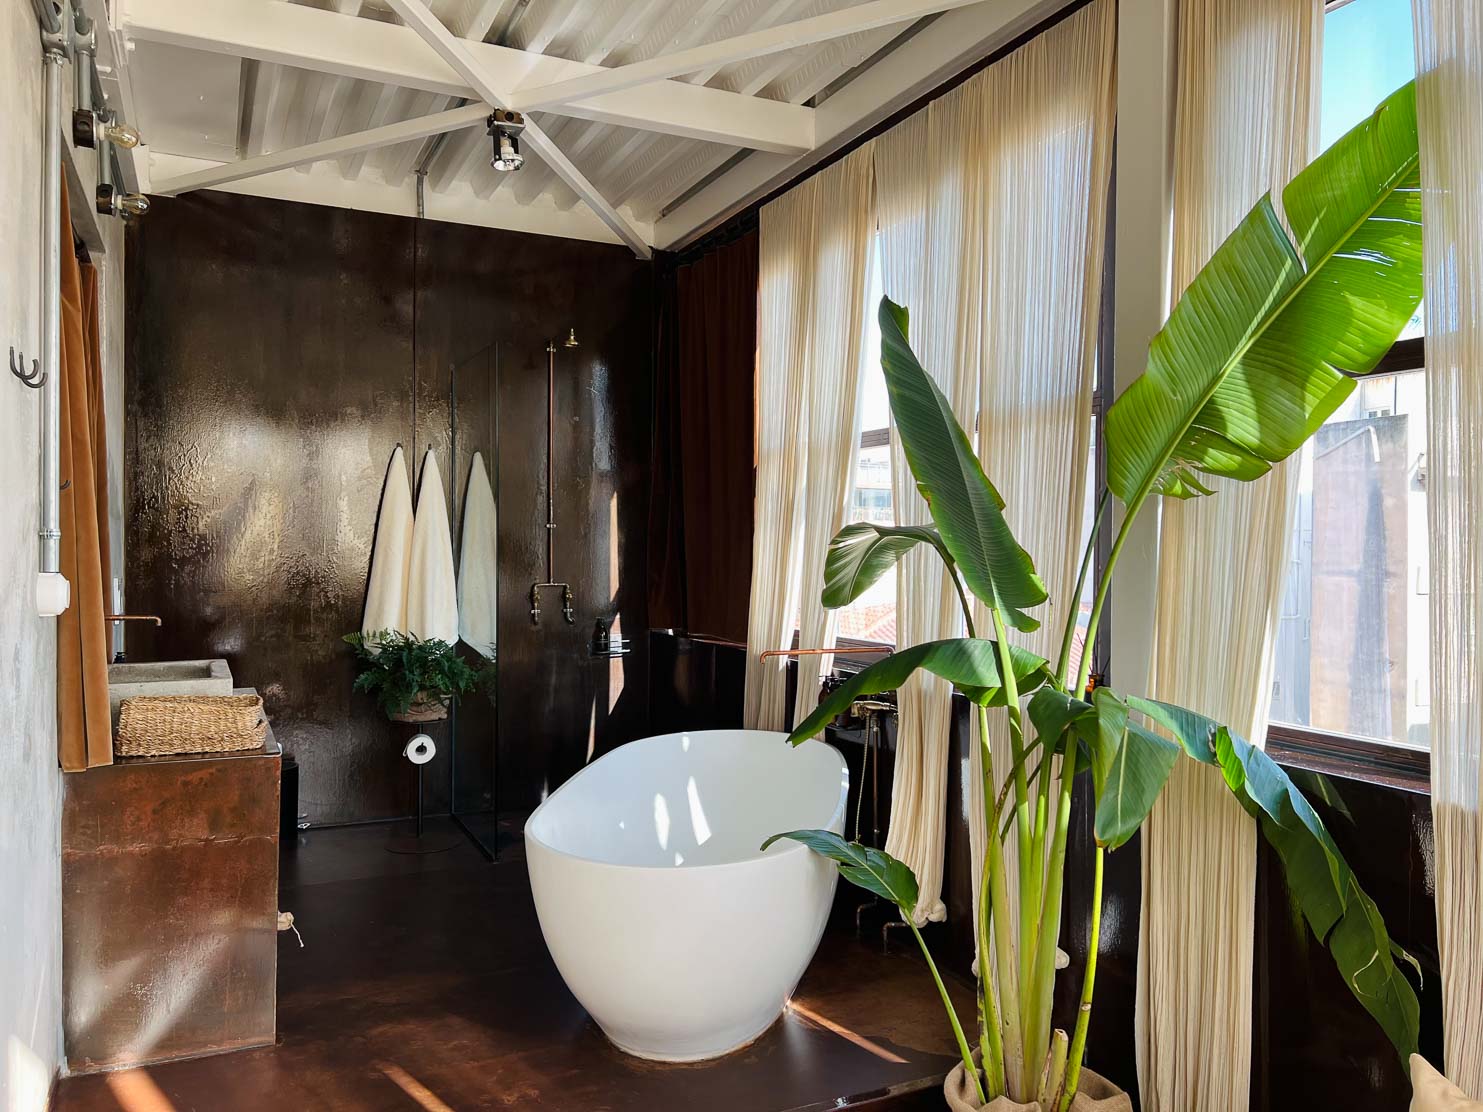 Mona The Penthouse bathroom, where the balance of comfort and sensuality extends from the bedroom, with a standalone white corian bathtub and rain shower